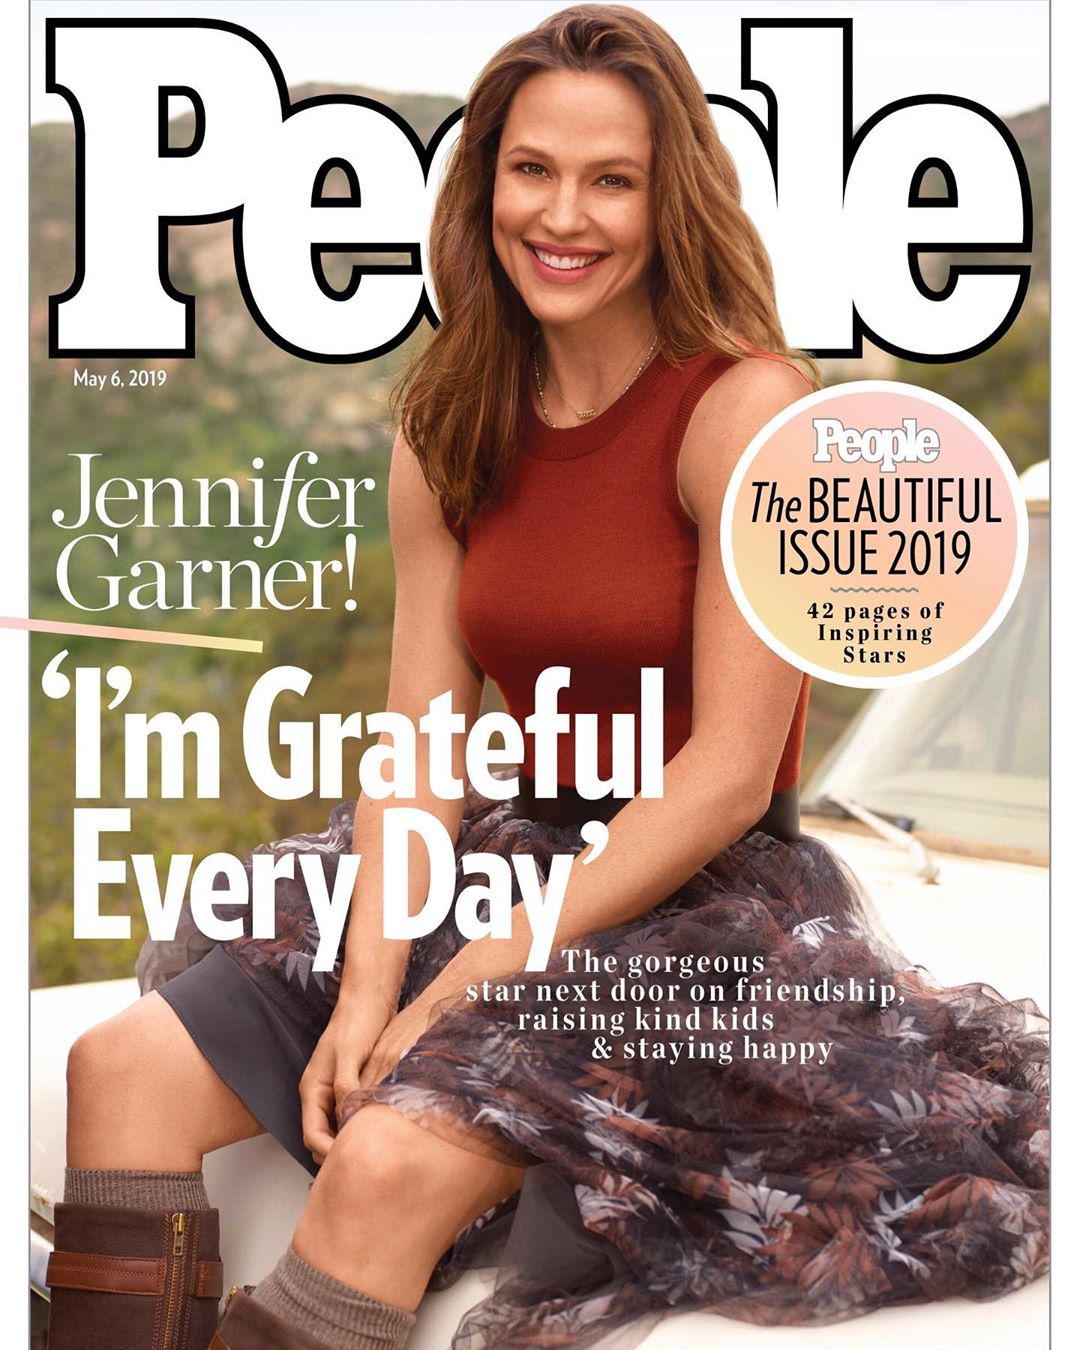 Jennifer Garner thinks her face on cover of Peoples Beautiful Issue is so ridiculous